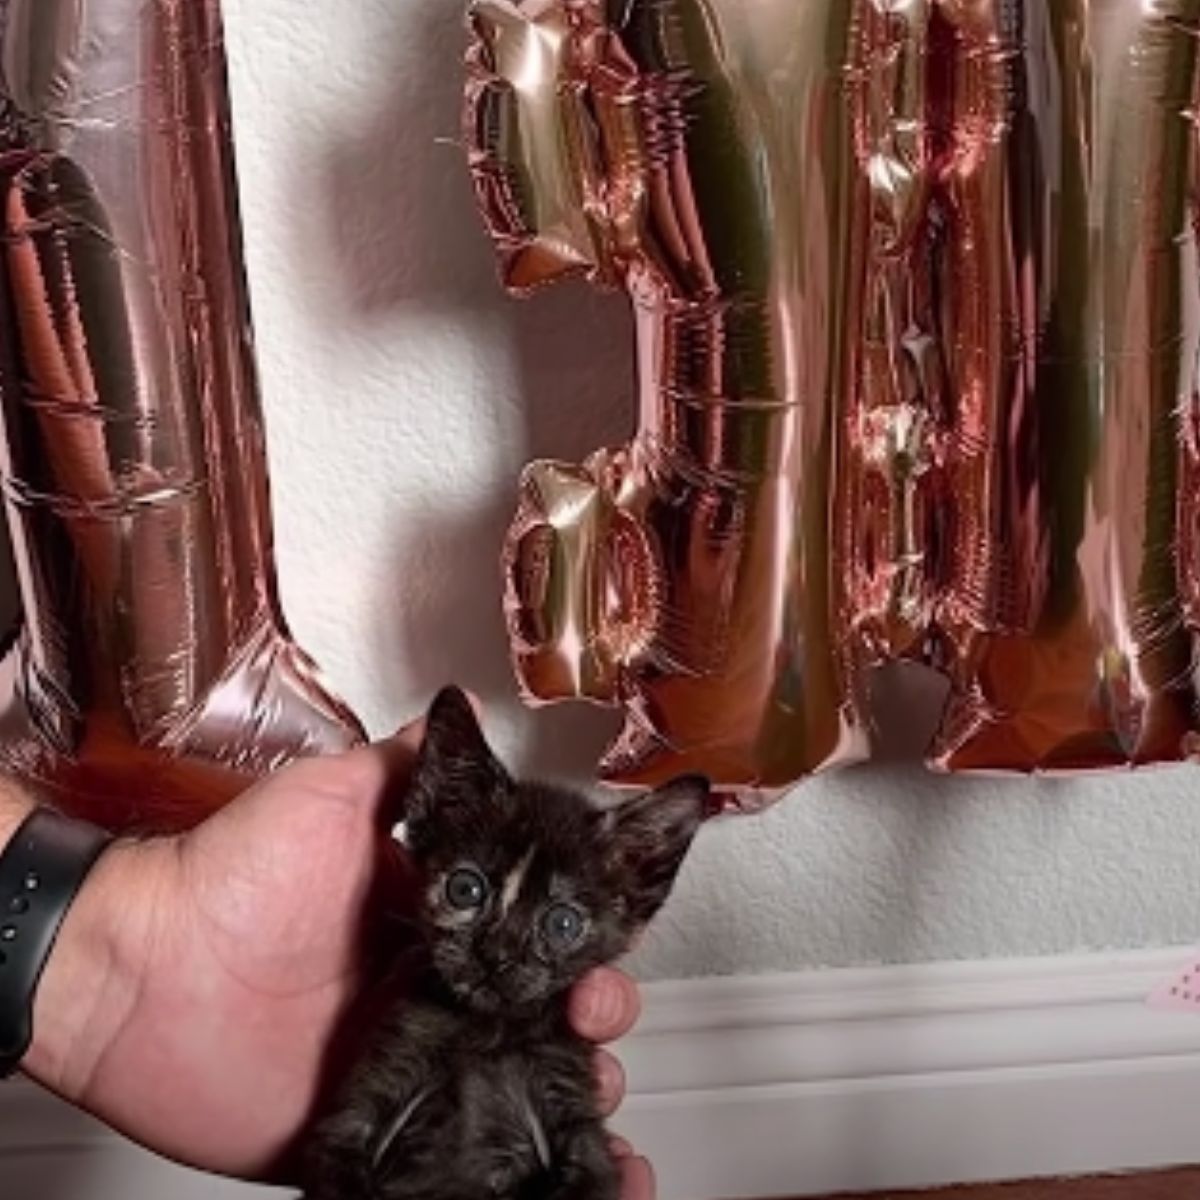 kitten in hand with balloons